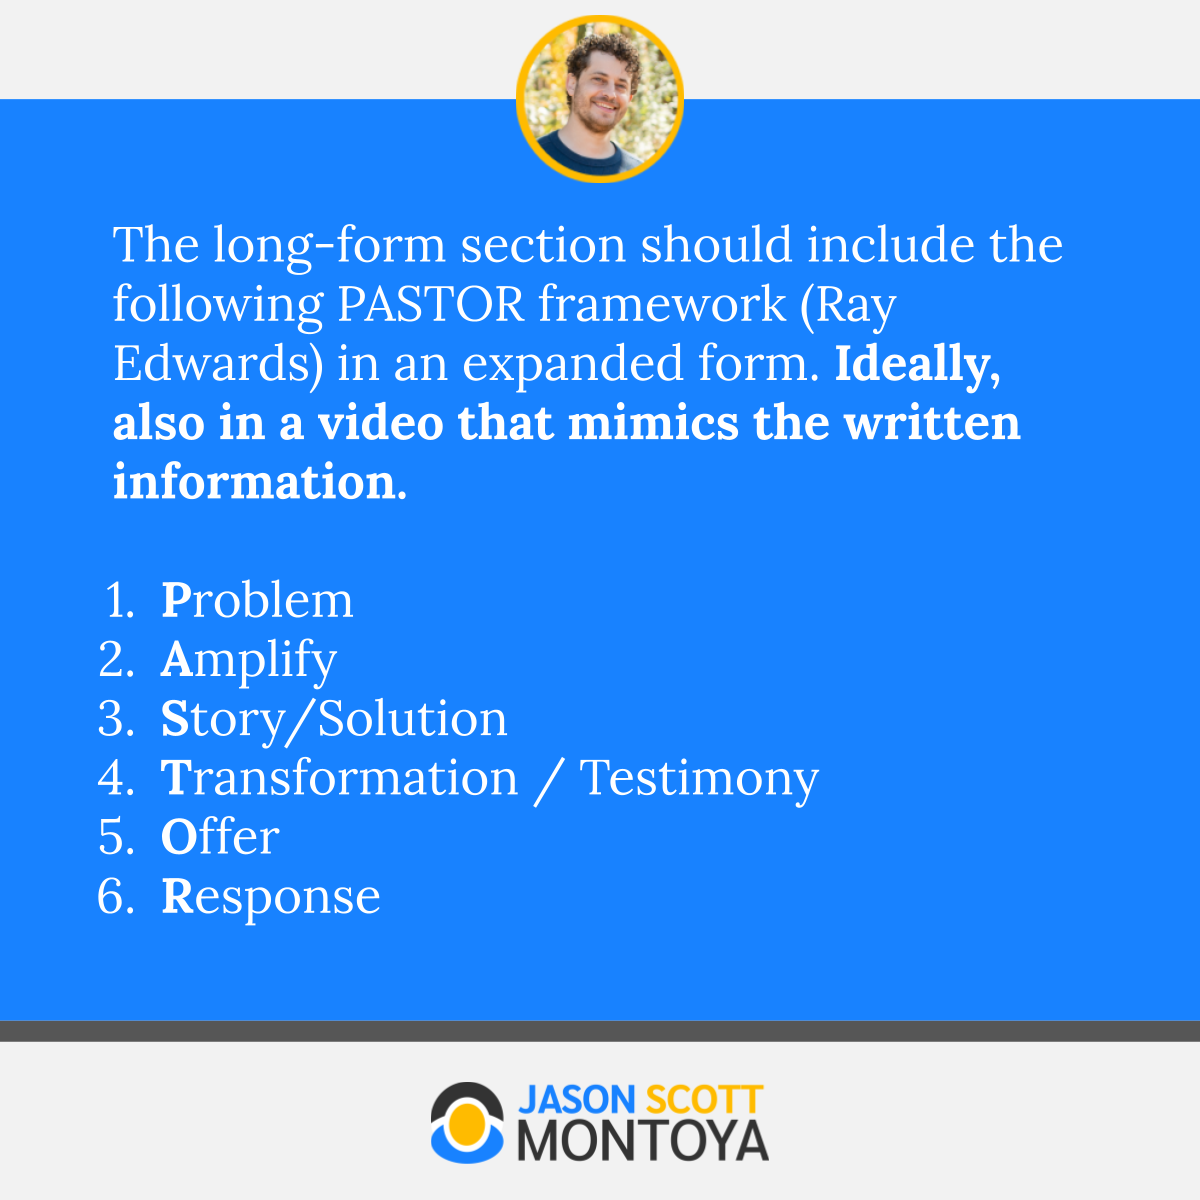 The long-form section should include the following PASTOR framework (Ray Edwards) in an expanded form. Ideally, also in a video that mimics the written information.  Problem Amplify Story/Solution Transformation / Testimony Offer Response